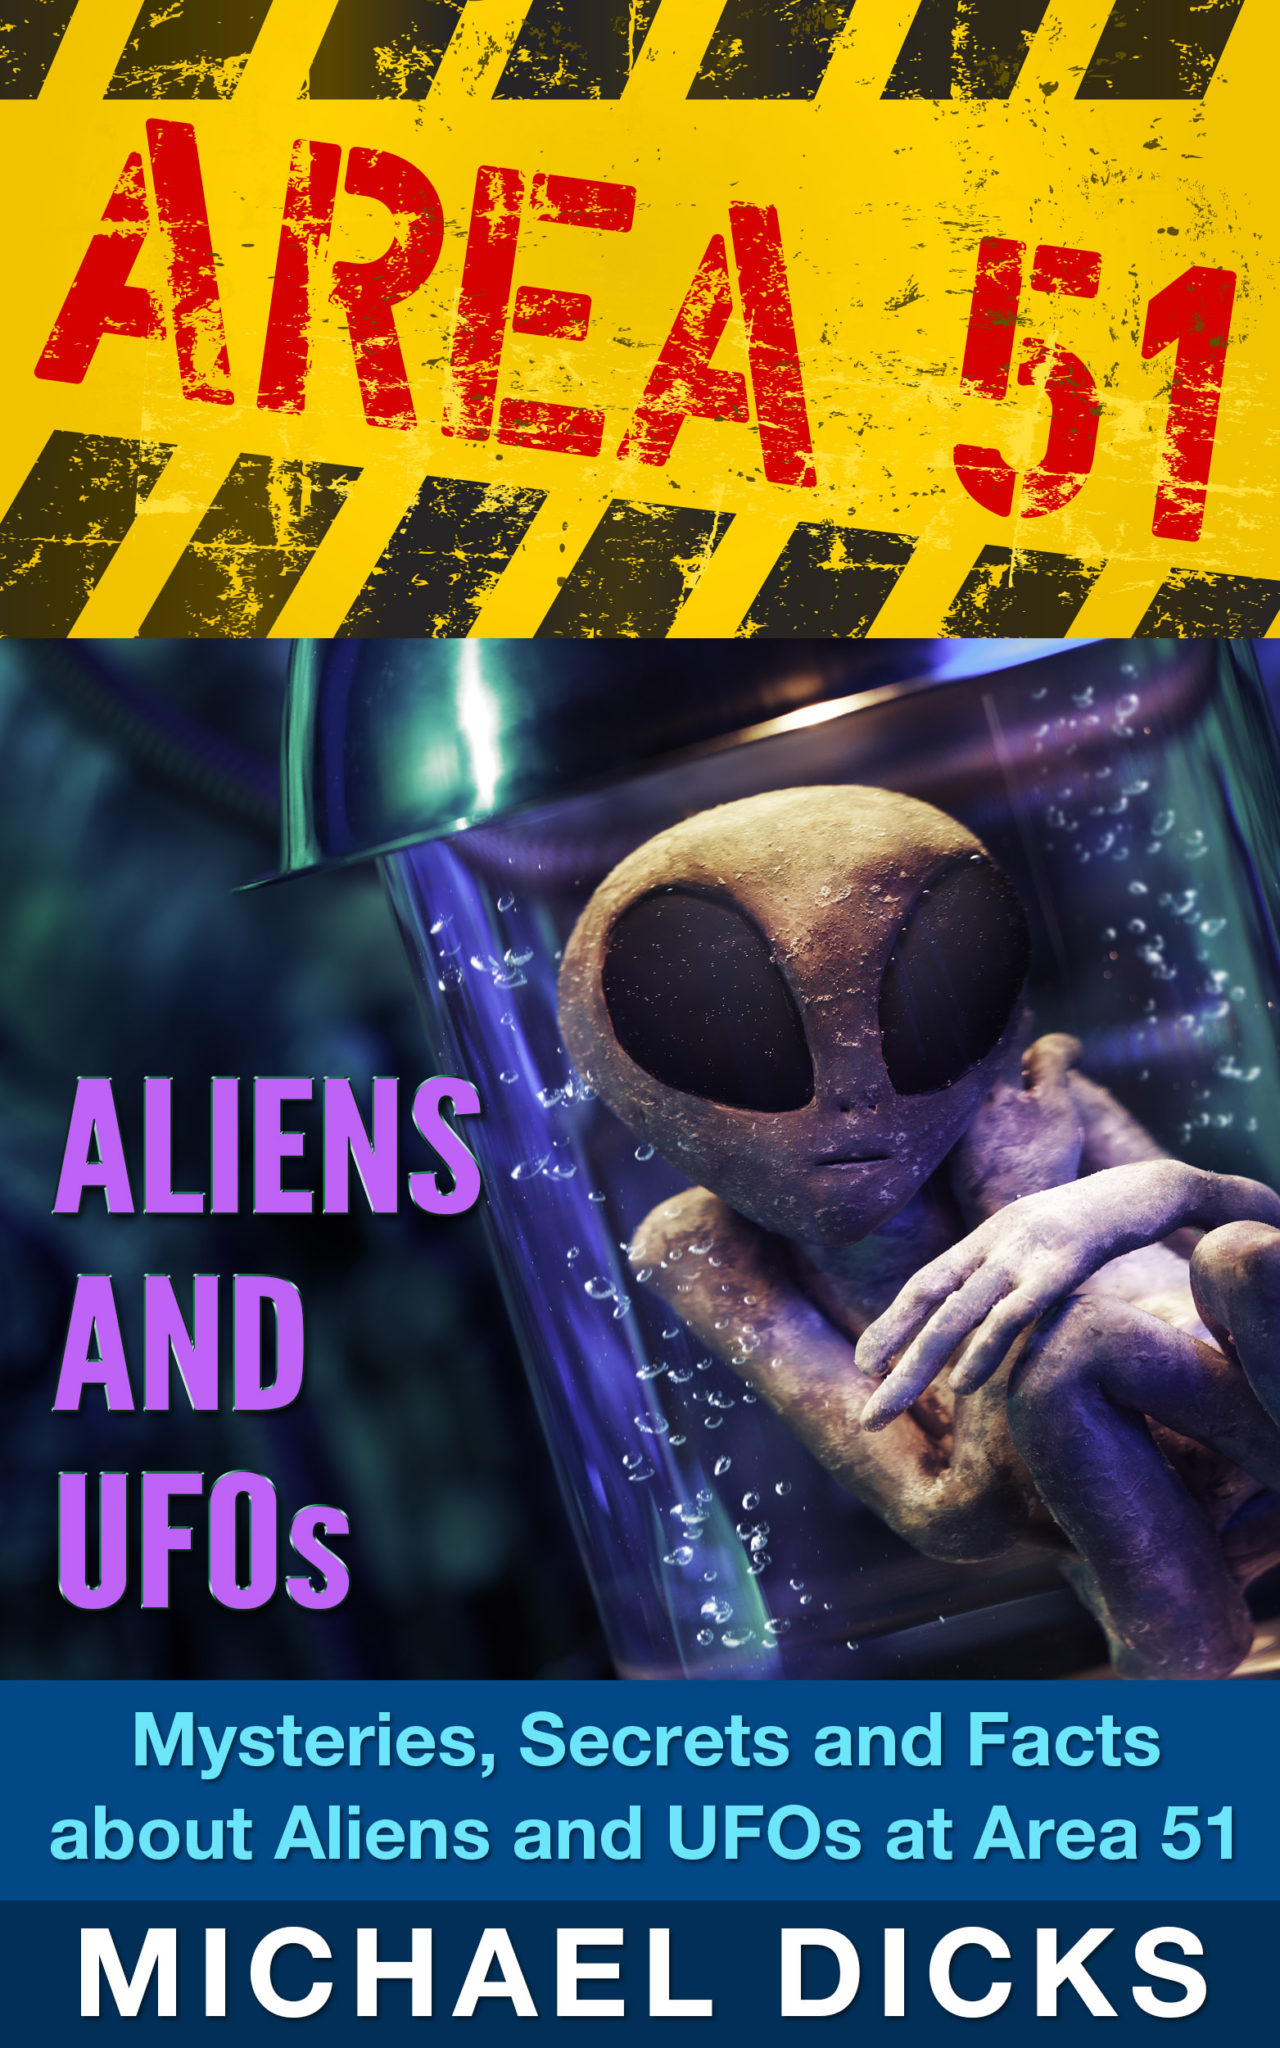 FREE: AREA 51 ALIENS AND UFOs – Mysteries, Secrets and Facts about Aliens and UFOs at Area 51 by Michael Dicks